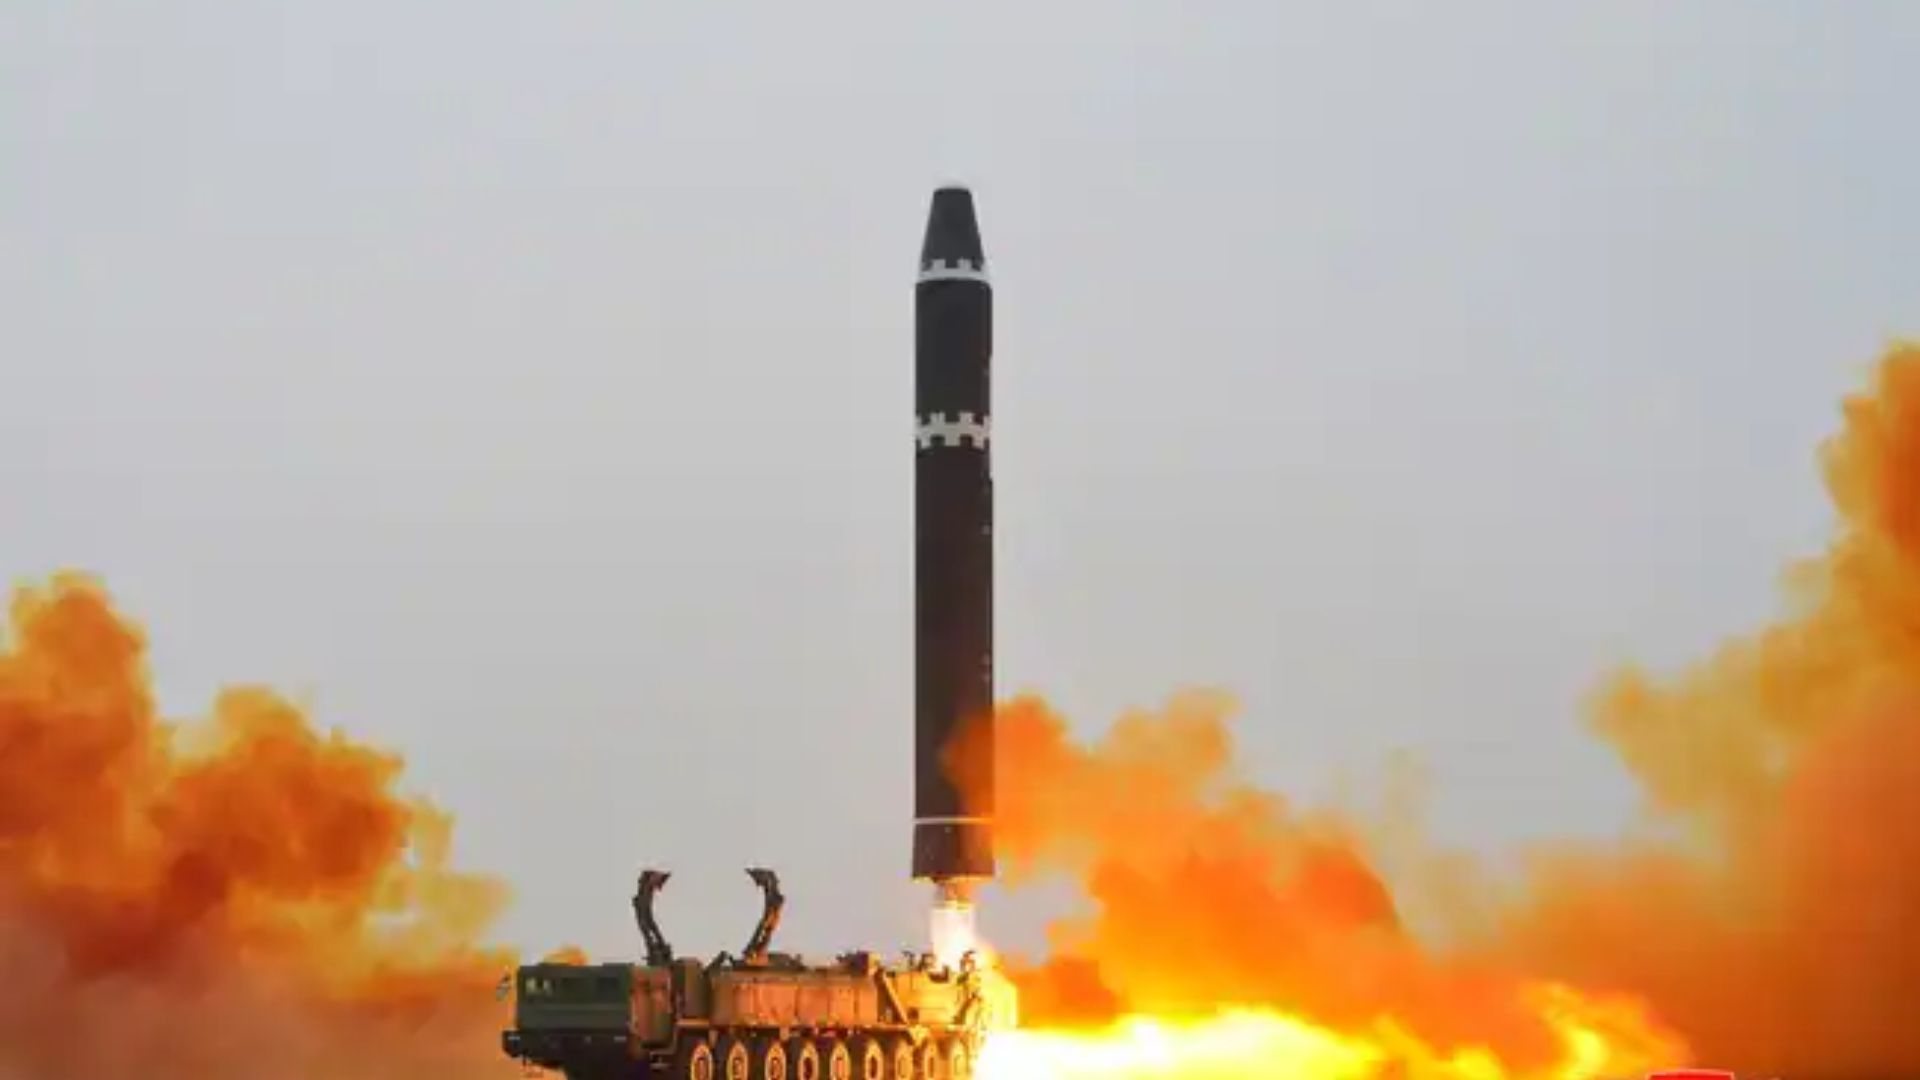 North Korea Conducts Fourth Cruise Missile Launch this Year, Raising Regional Concerns